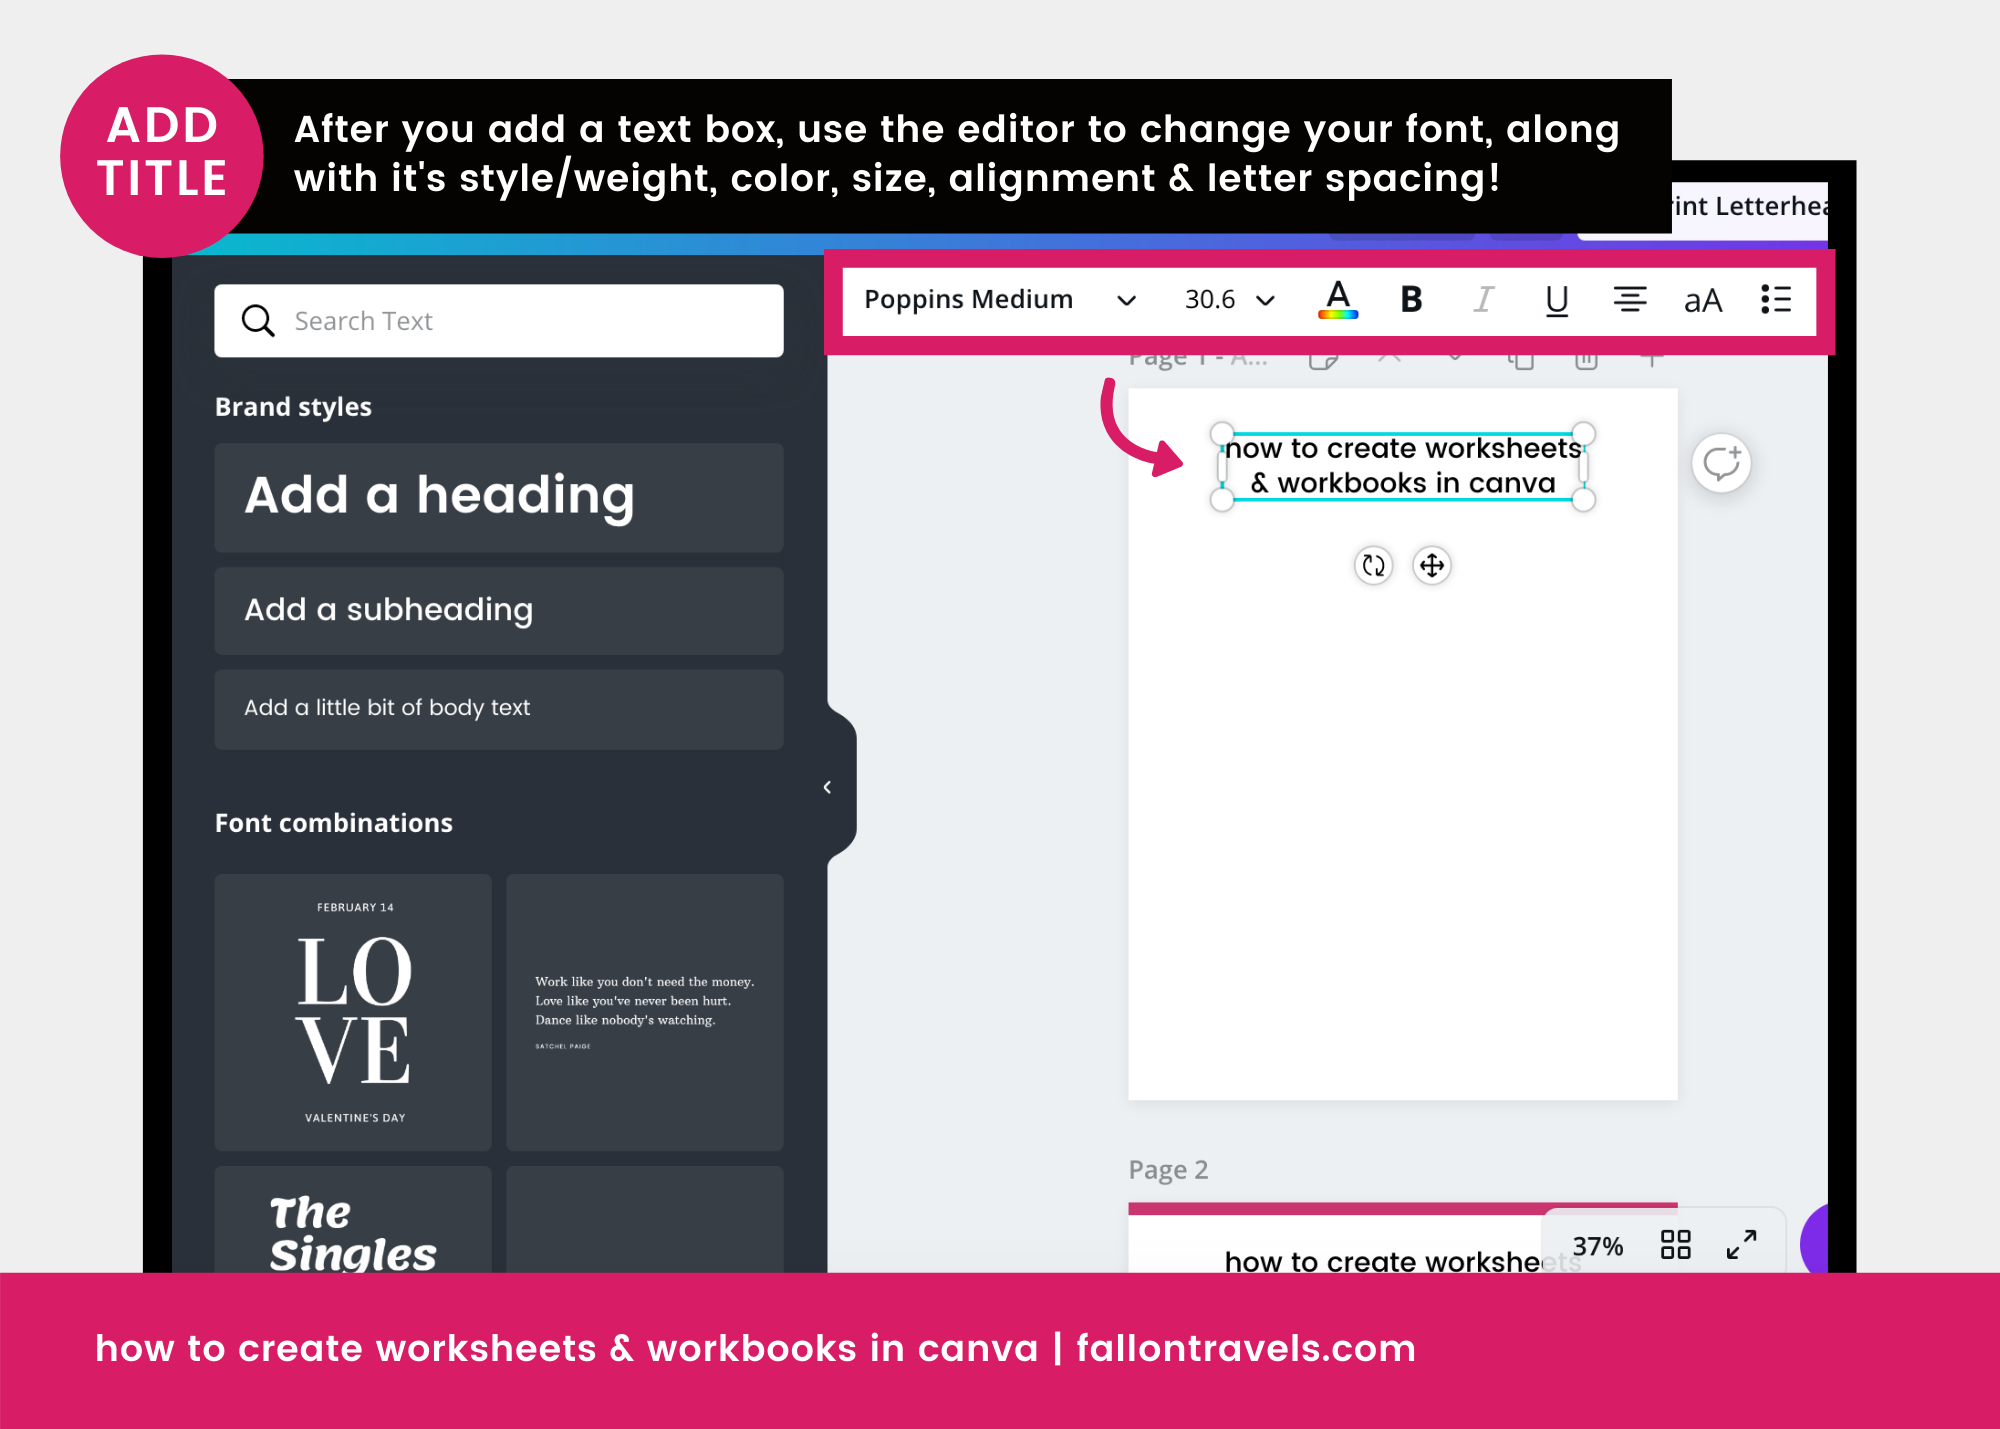 How to create worksheets and workbooks in canva